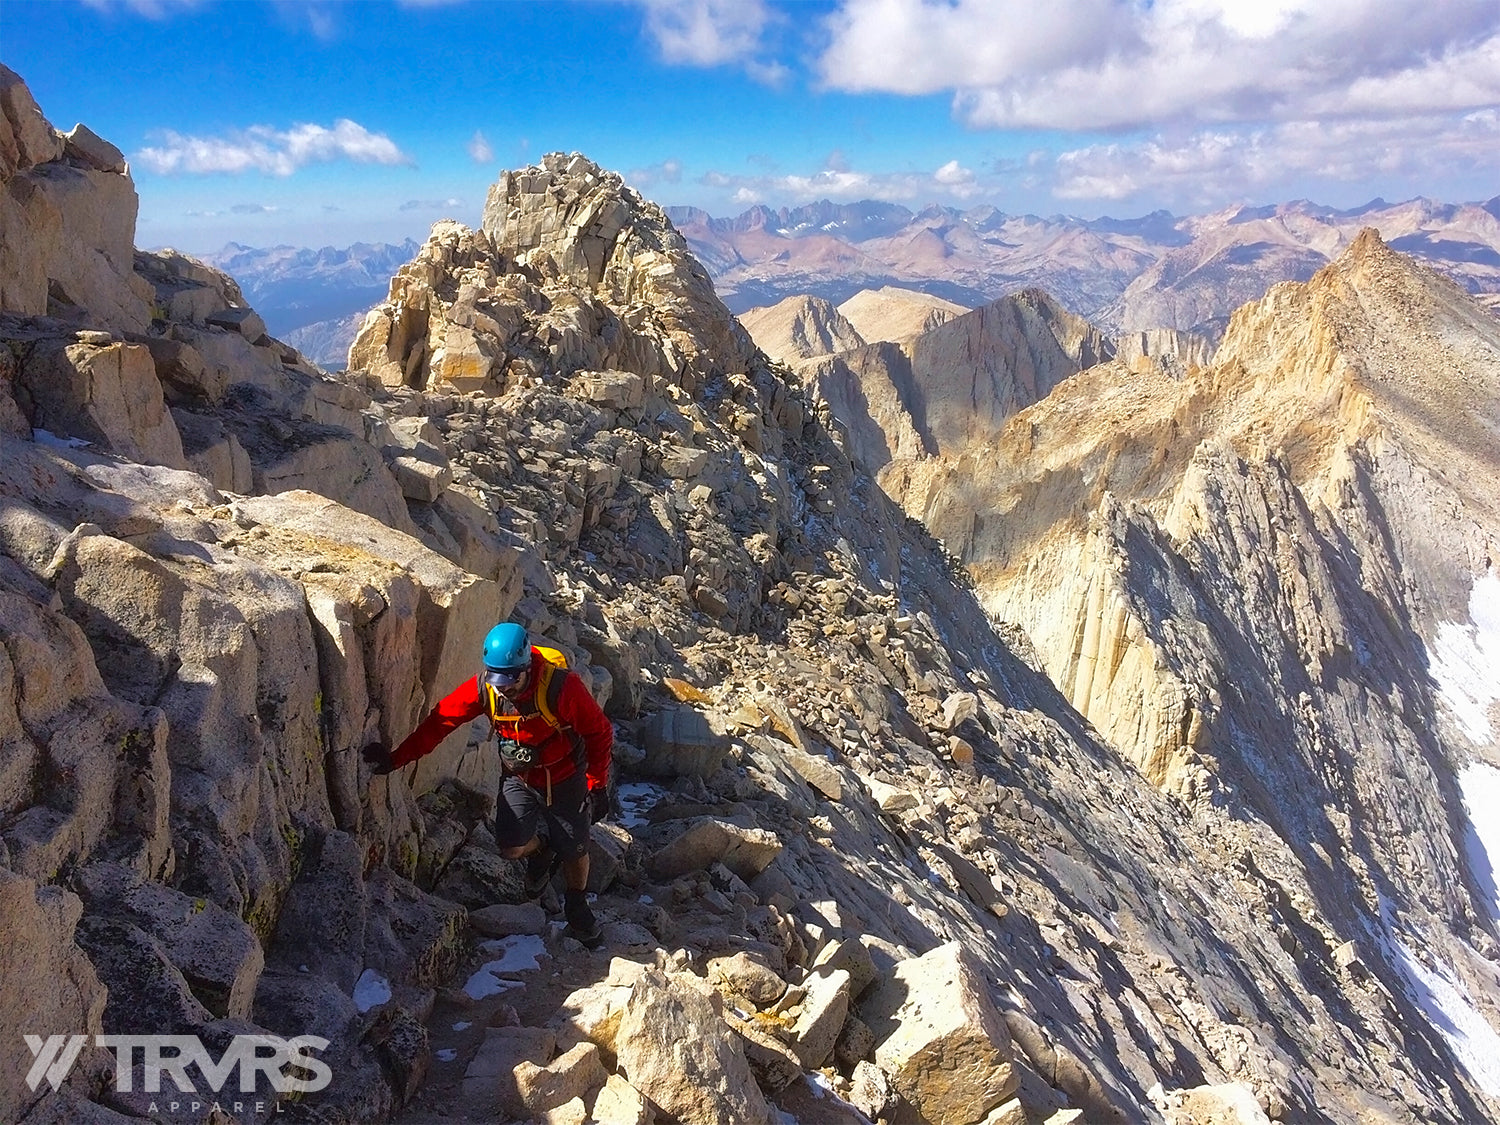 The Return from the West Summit of Mount Russell | TRVRS APPAREL